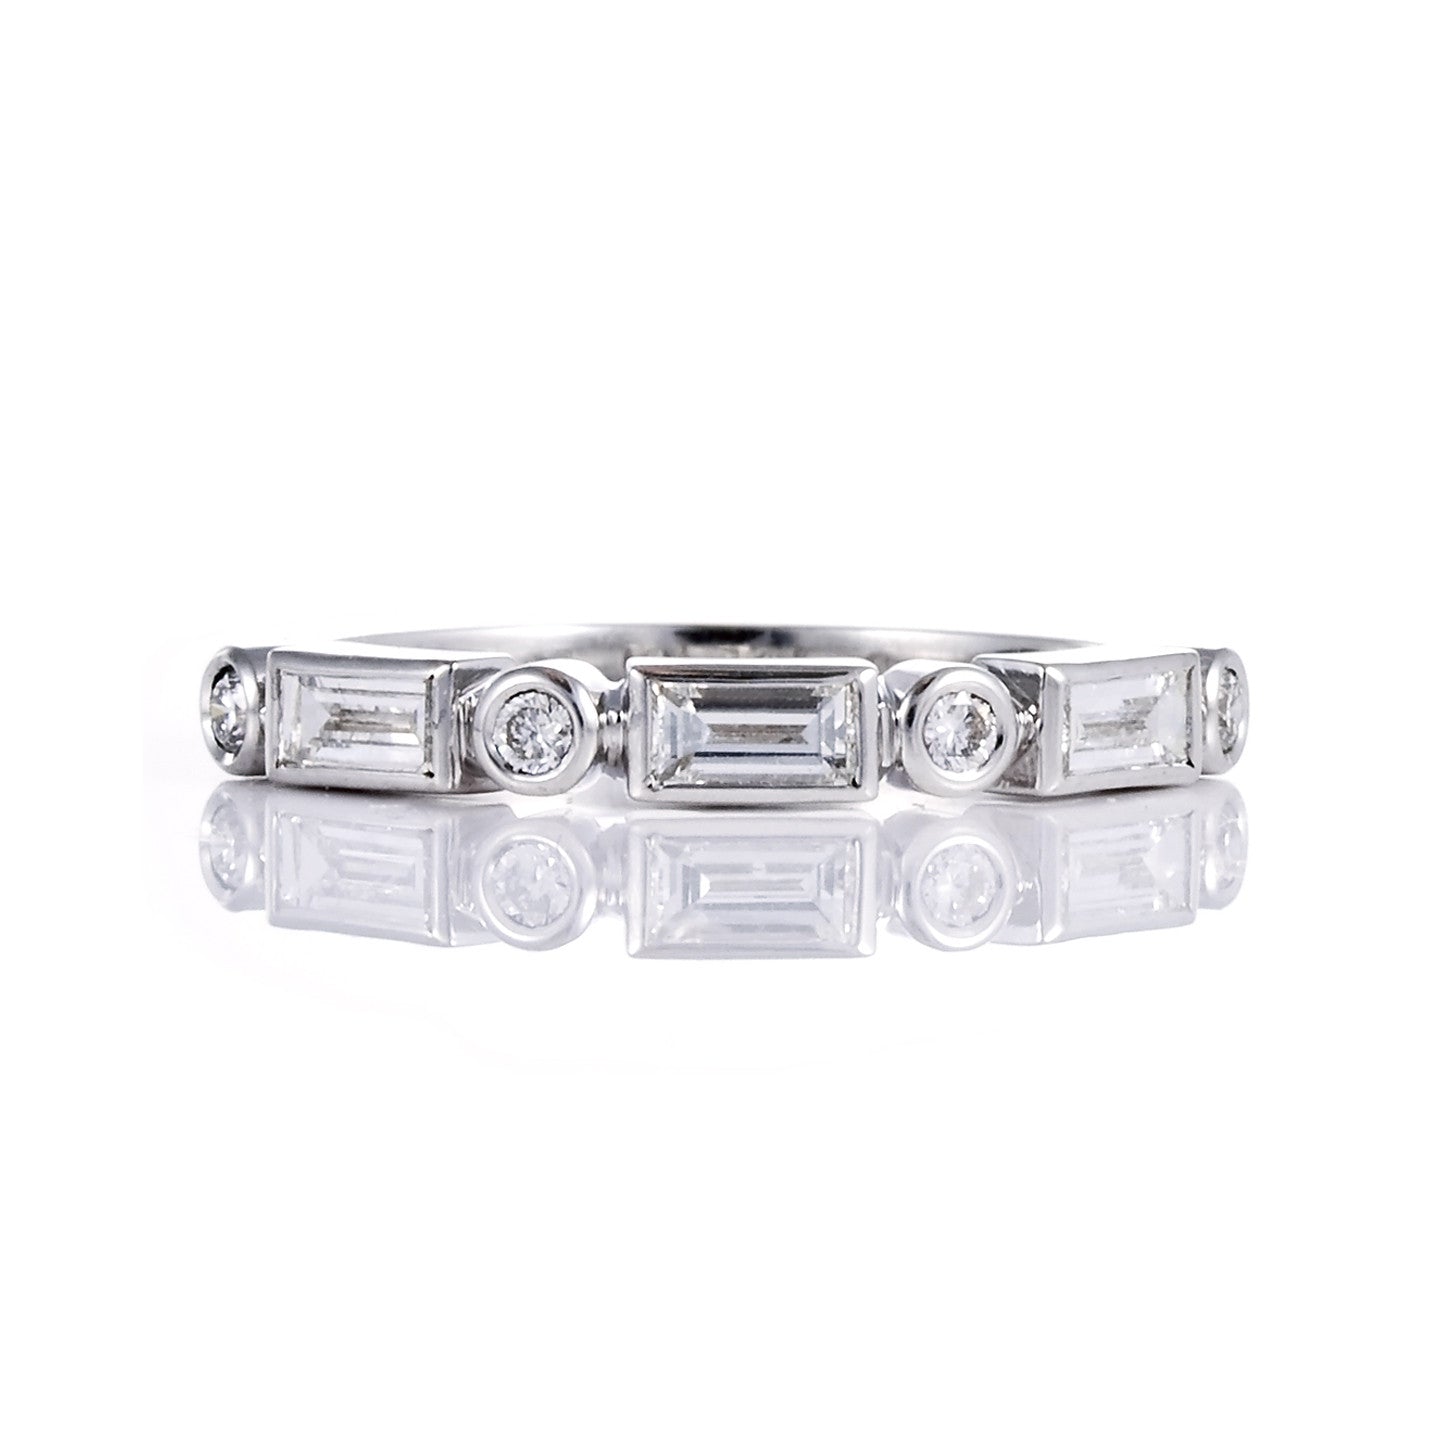 Bespoke Art Deco-inspired wedding band - 18ct recycled white gold - baguette and brilliant diamonds in rub-over settings